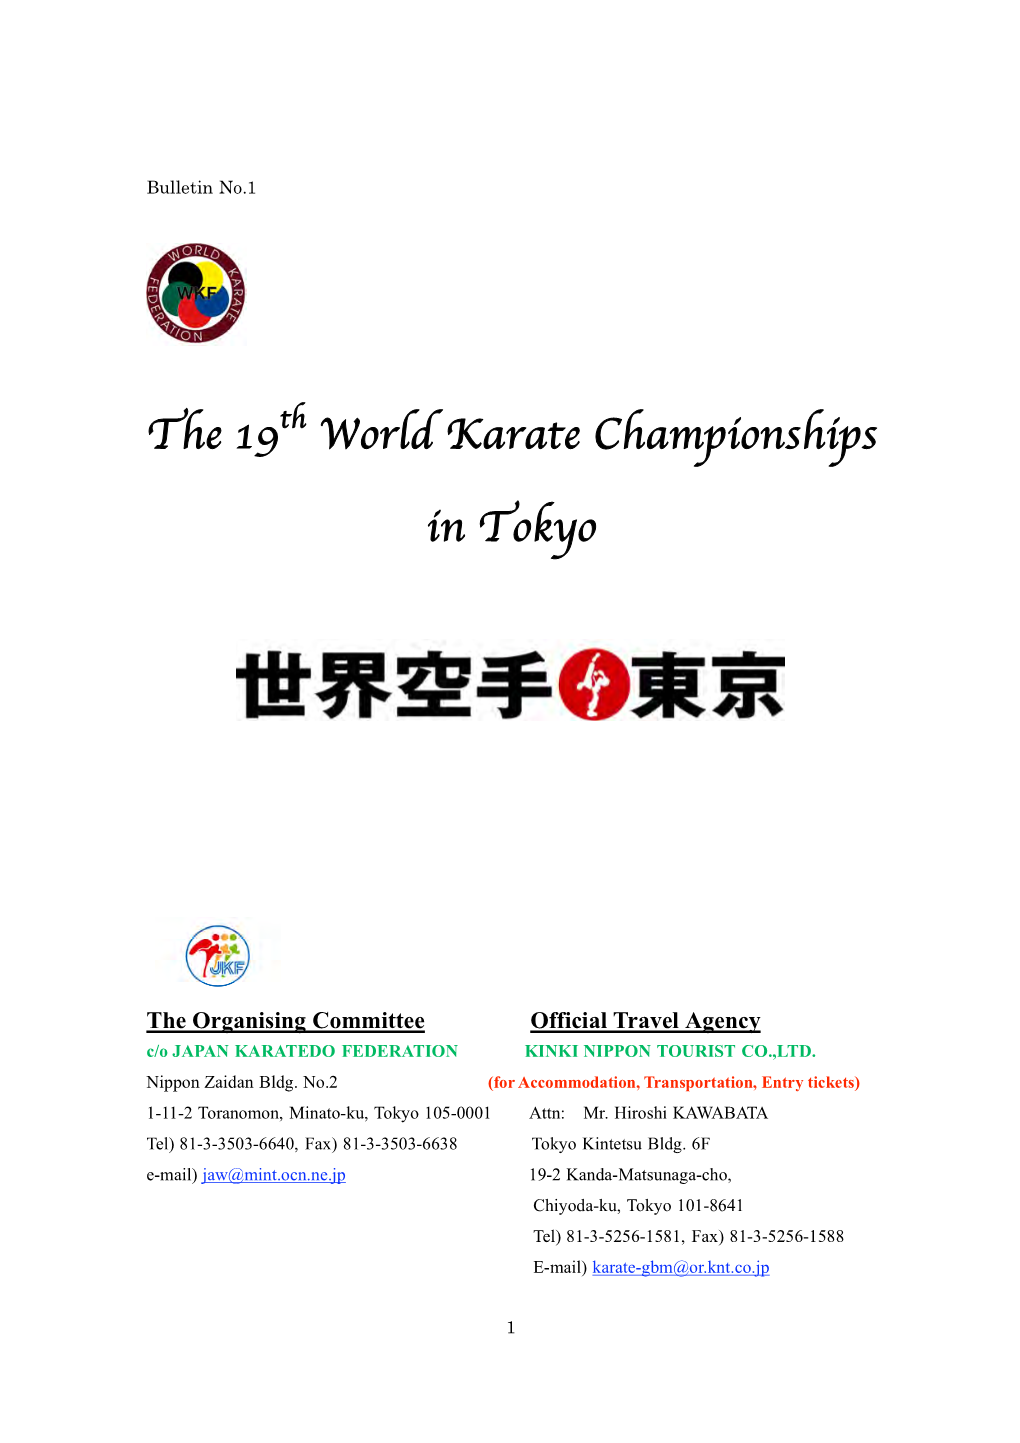 The 19Th World Karate Championships in Tokyo